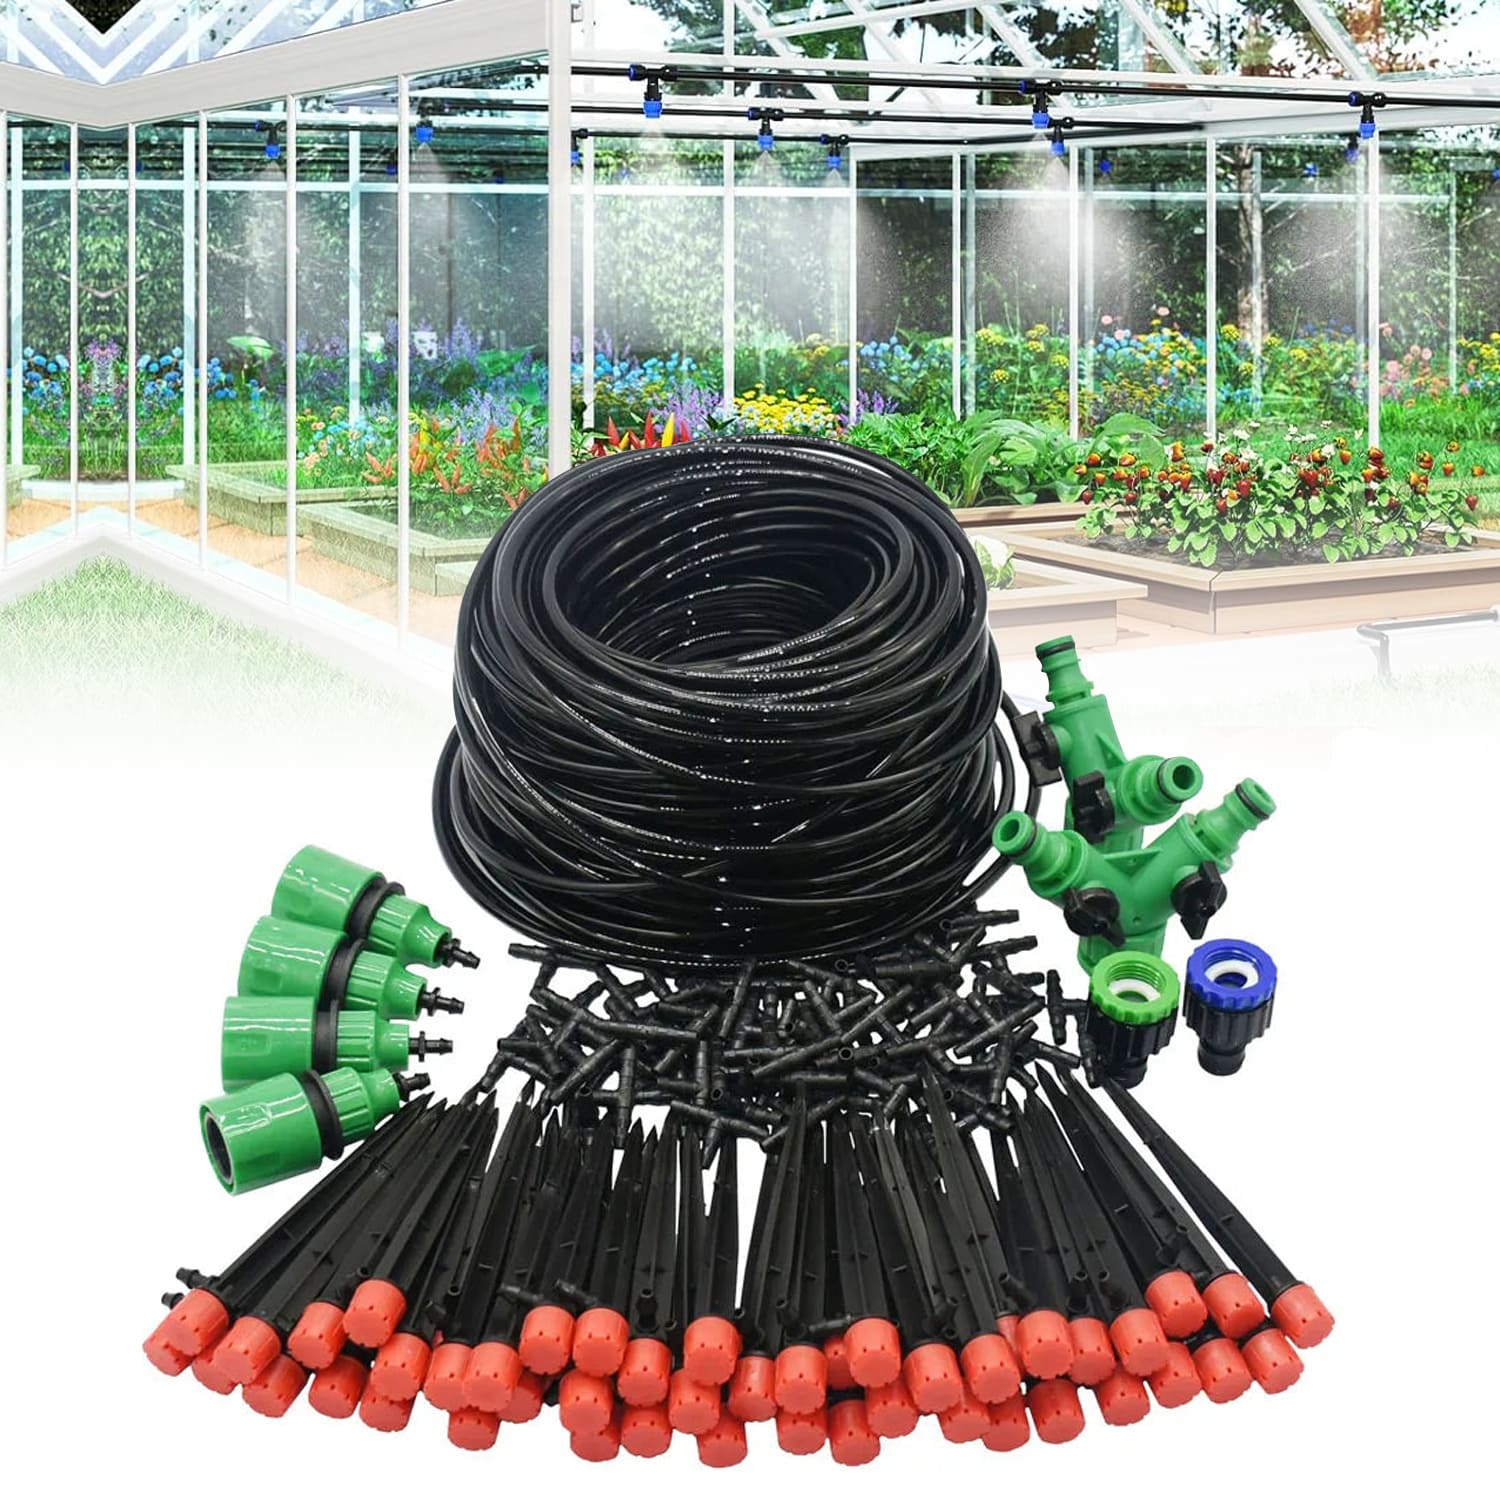 DIY Drip Irrigation System Watering Kit for Raised Garden Bed, Yard, Lawn, Greenhouse